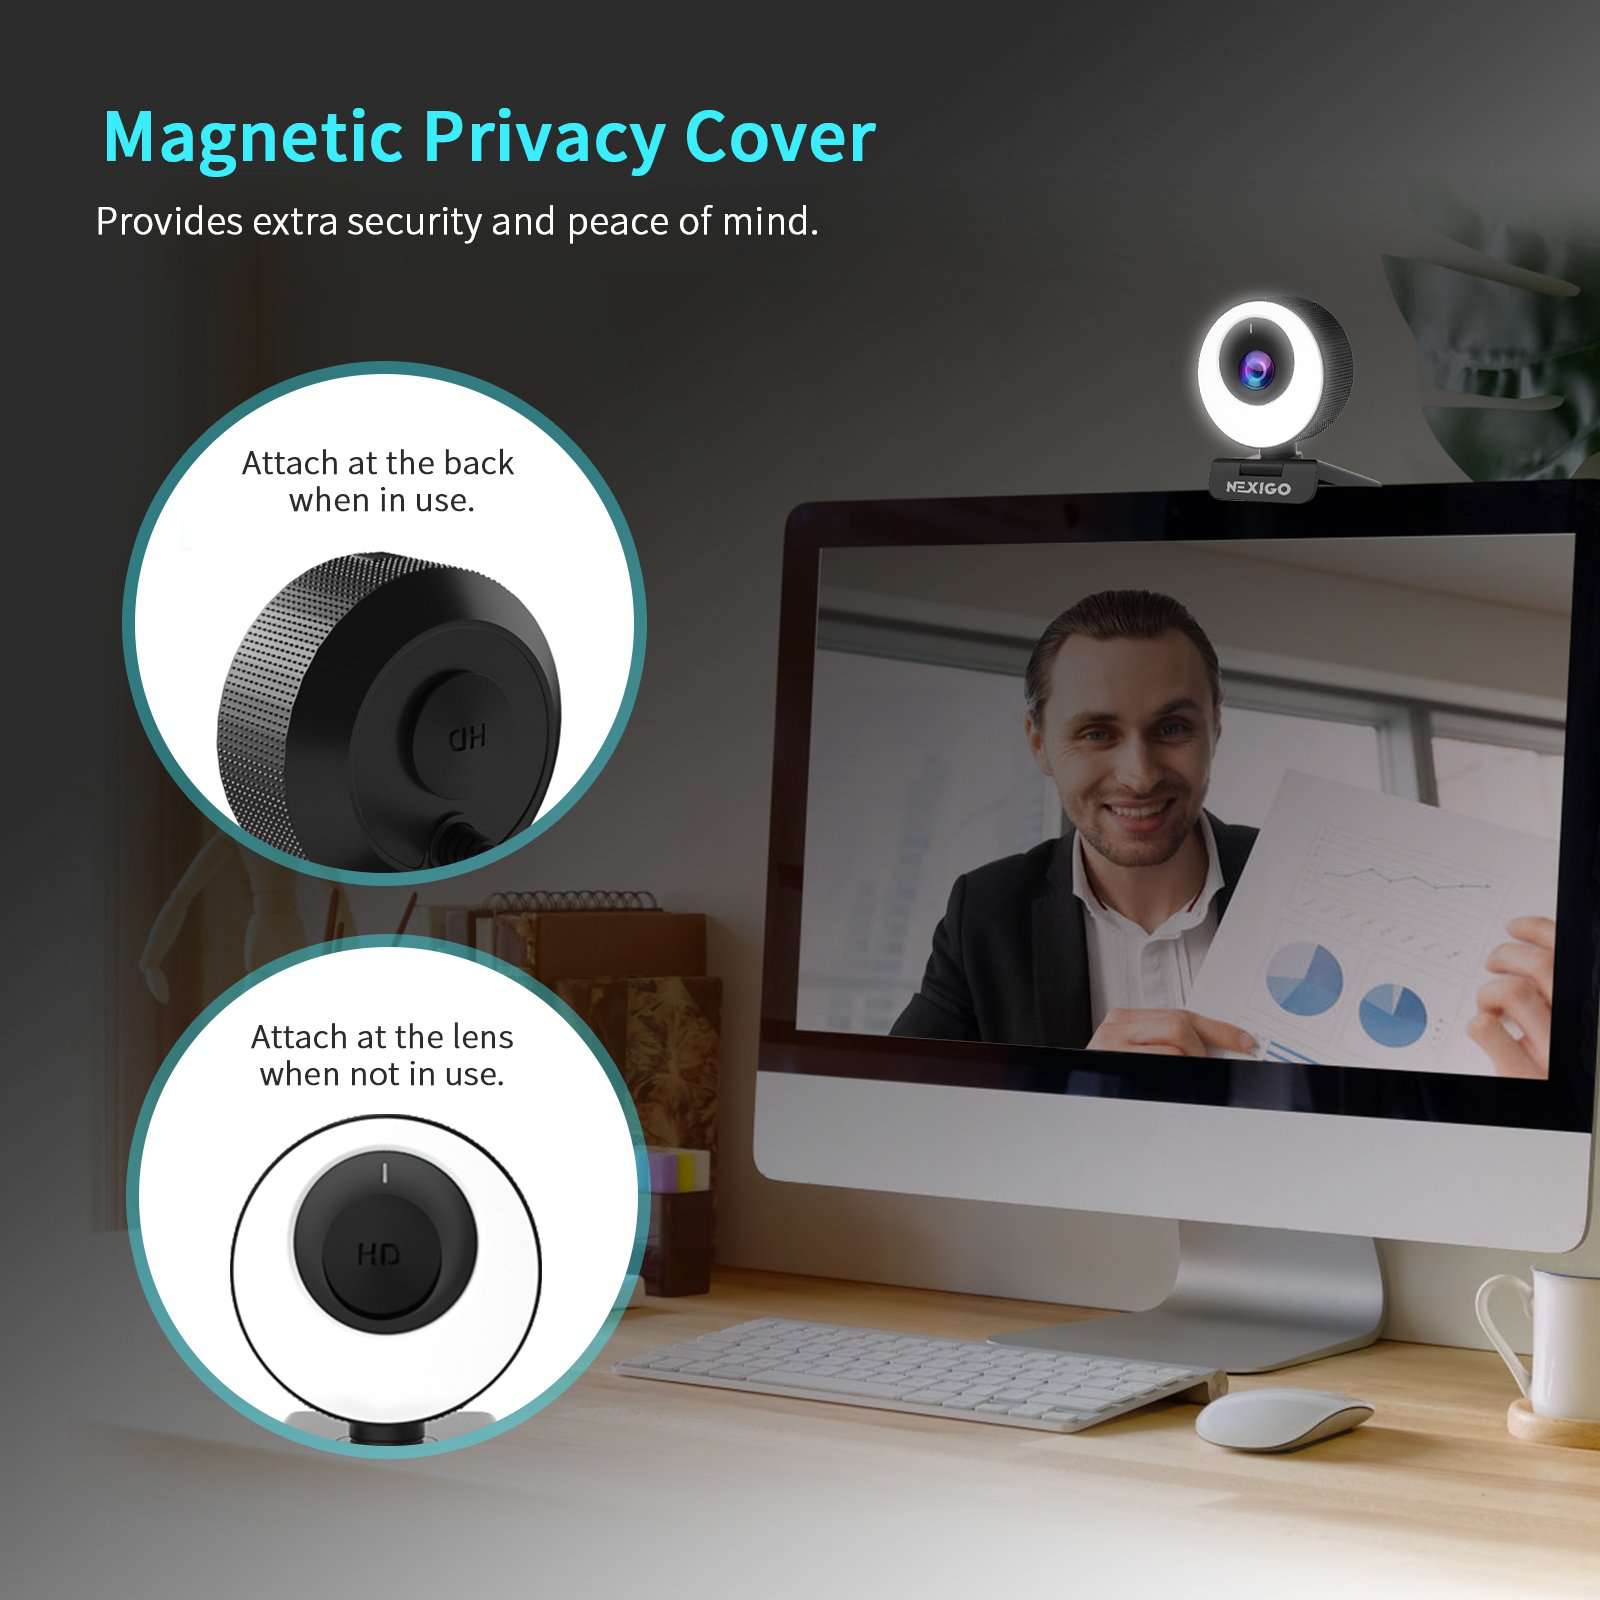 Attach magnetic privacy cover to lens when webcam not in use.